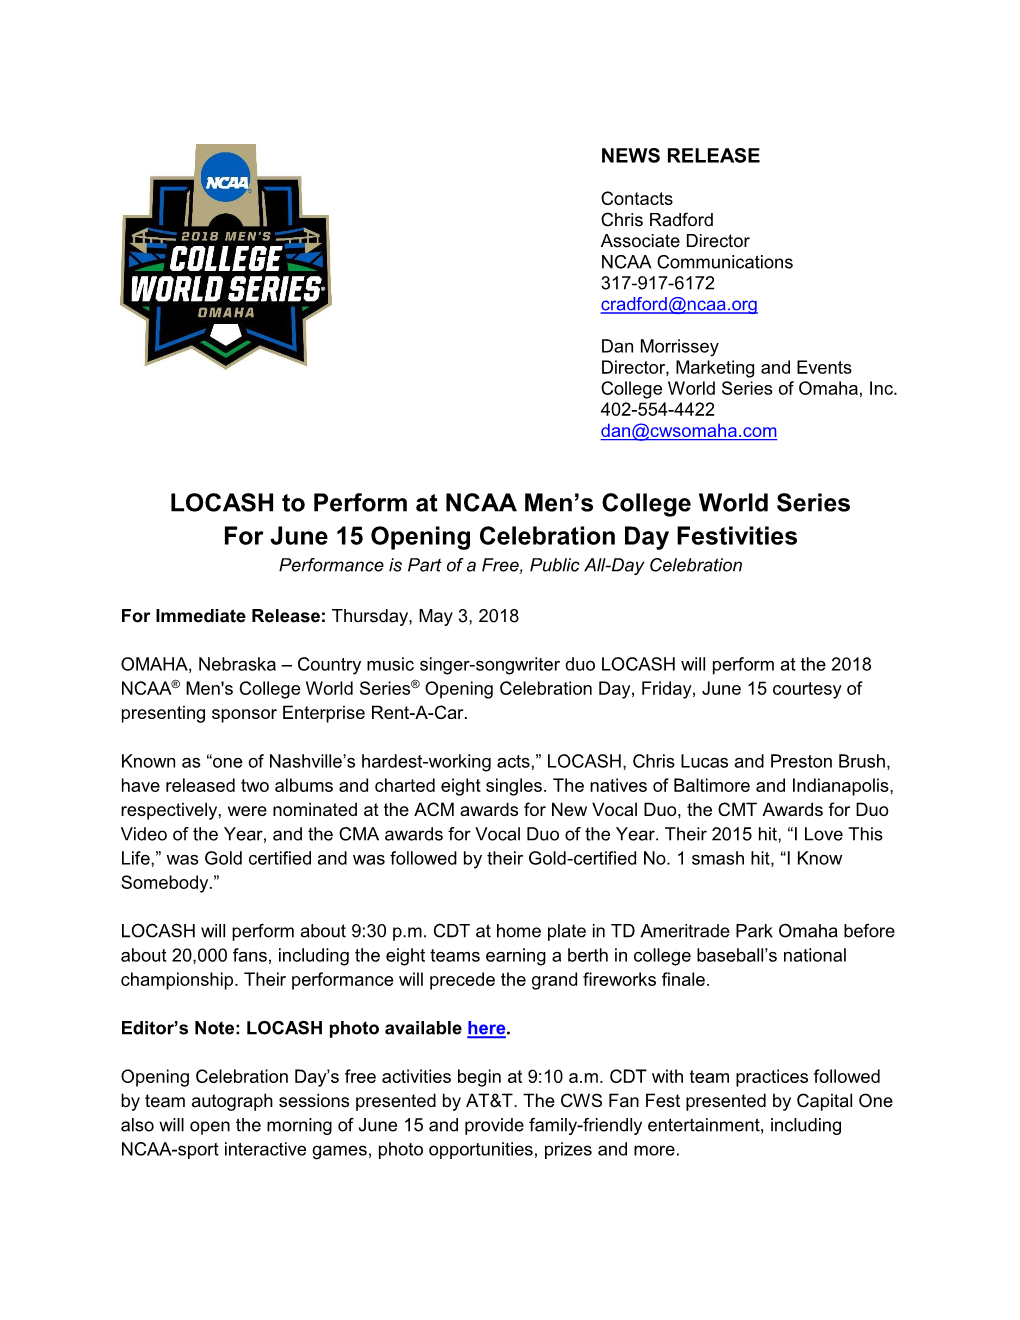 LOCASH to Perform at NCAA Men's College World Series for June 15